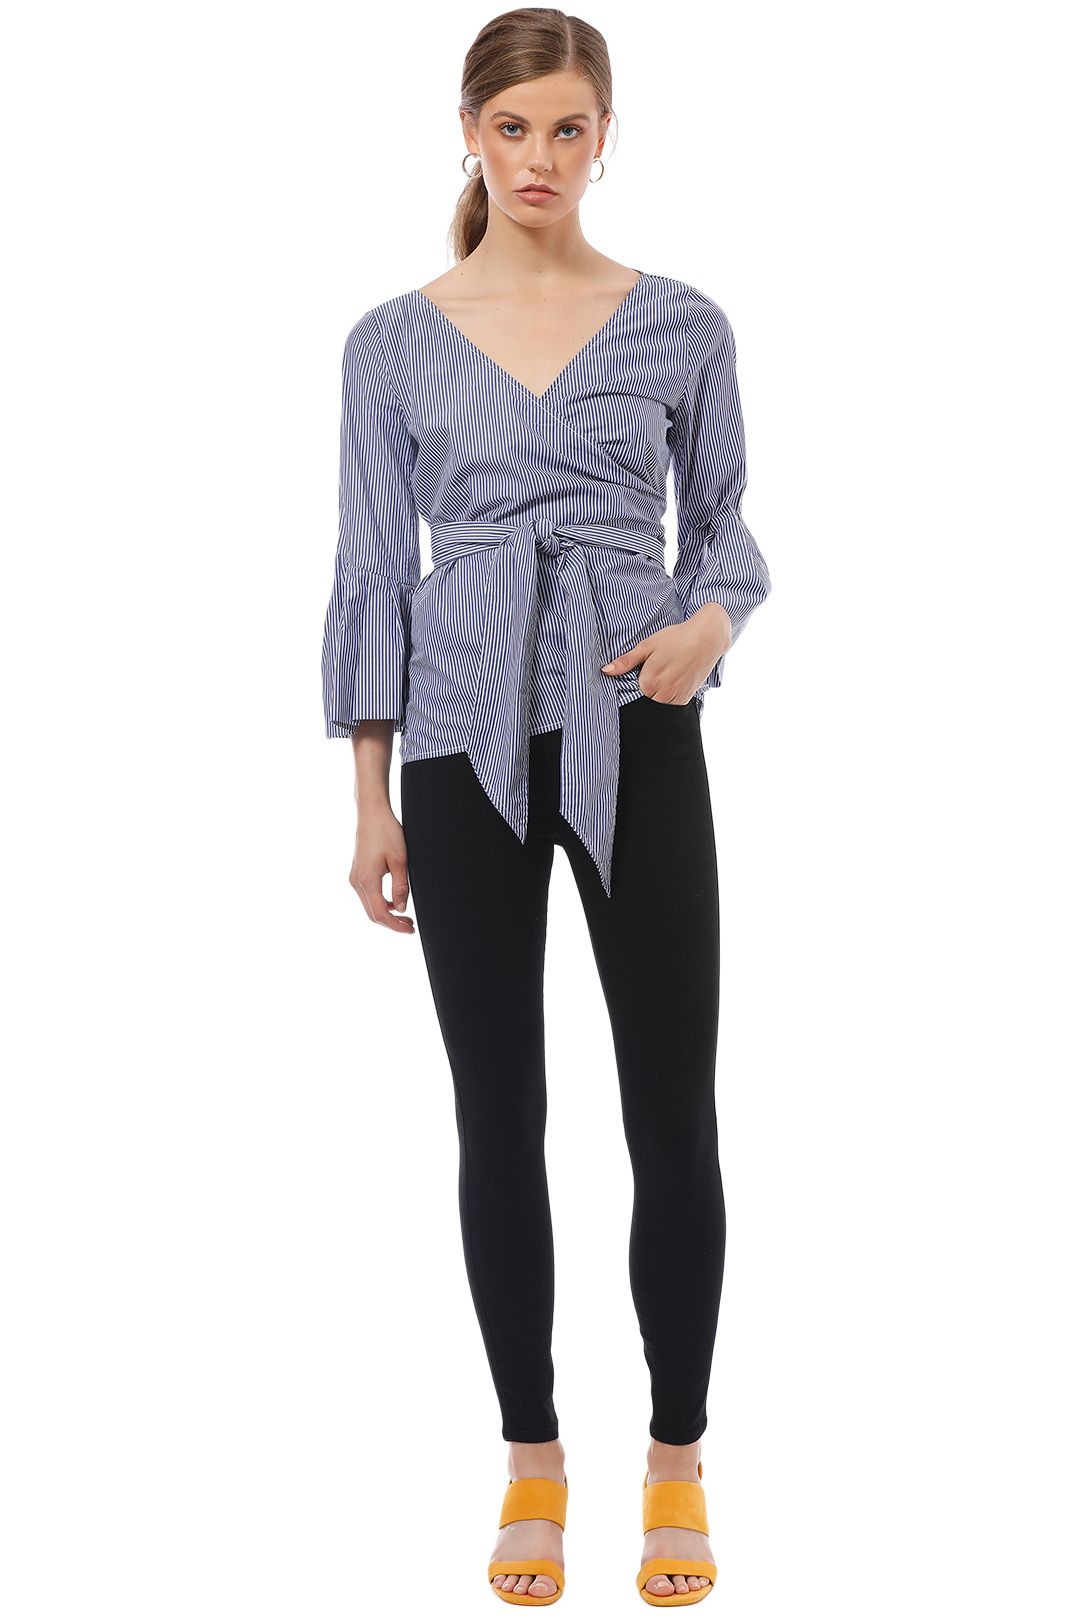 Camilla and Marc - Ashworth Wrap Top - Blue Stripe - Front